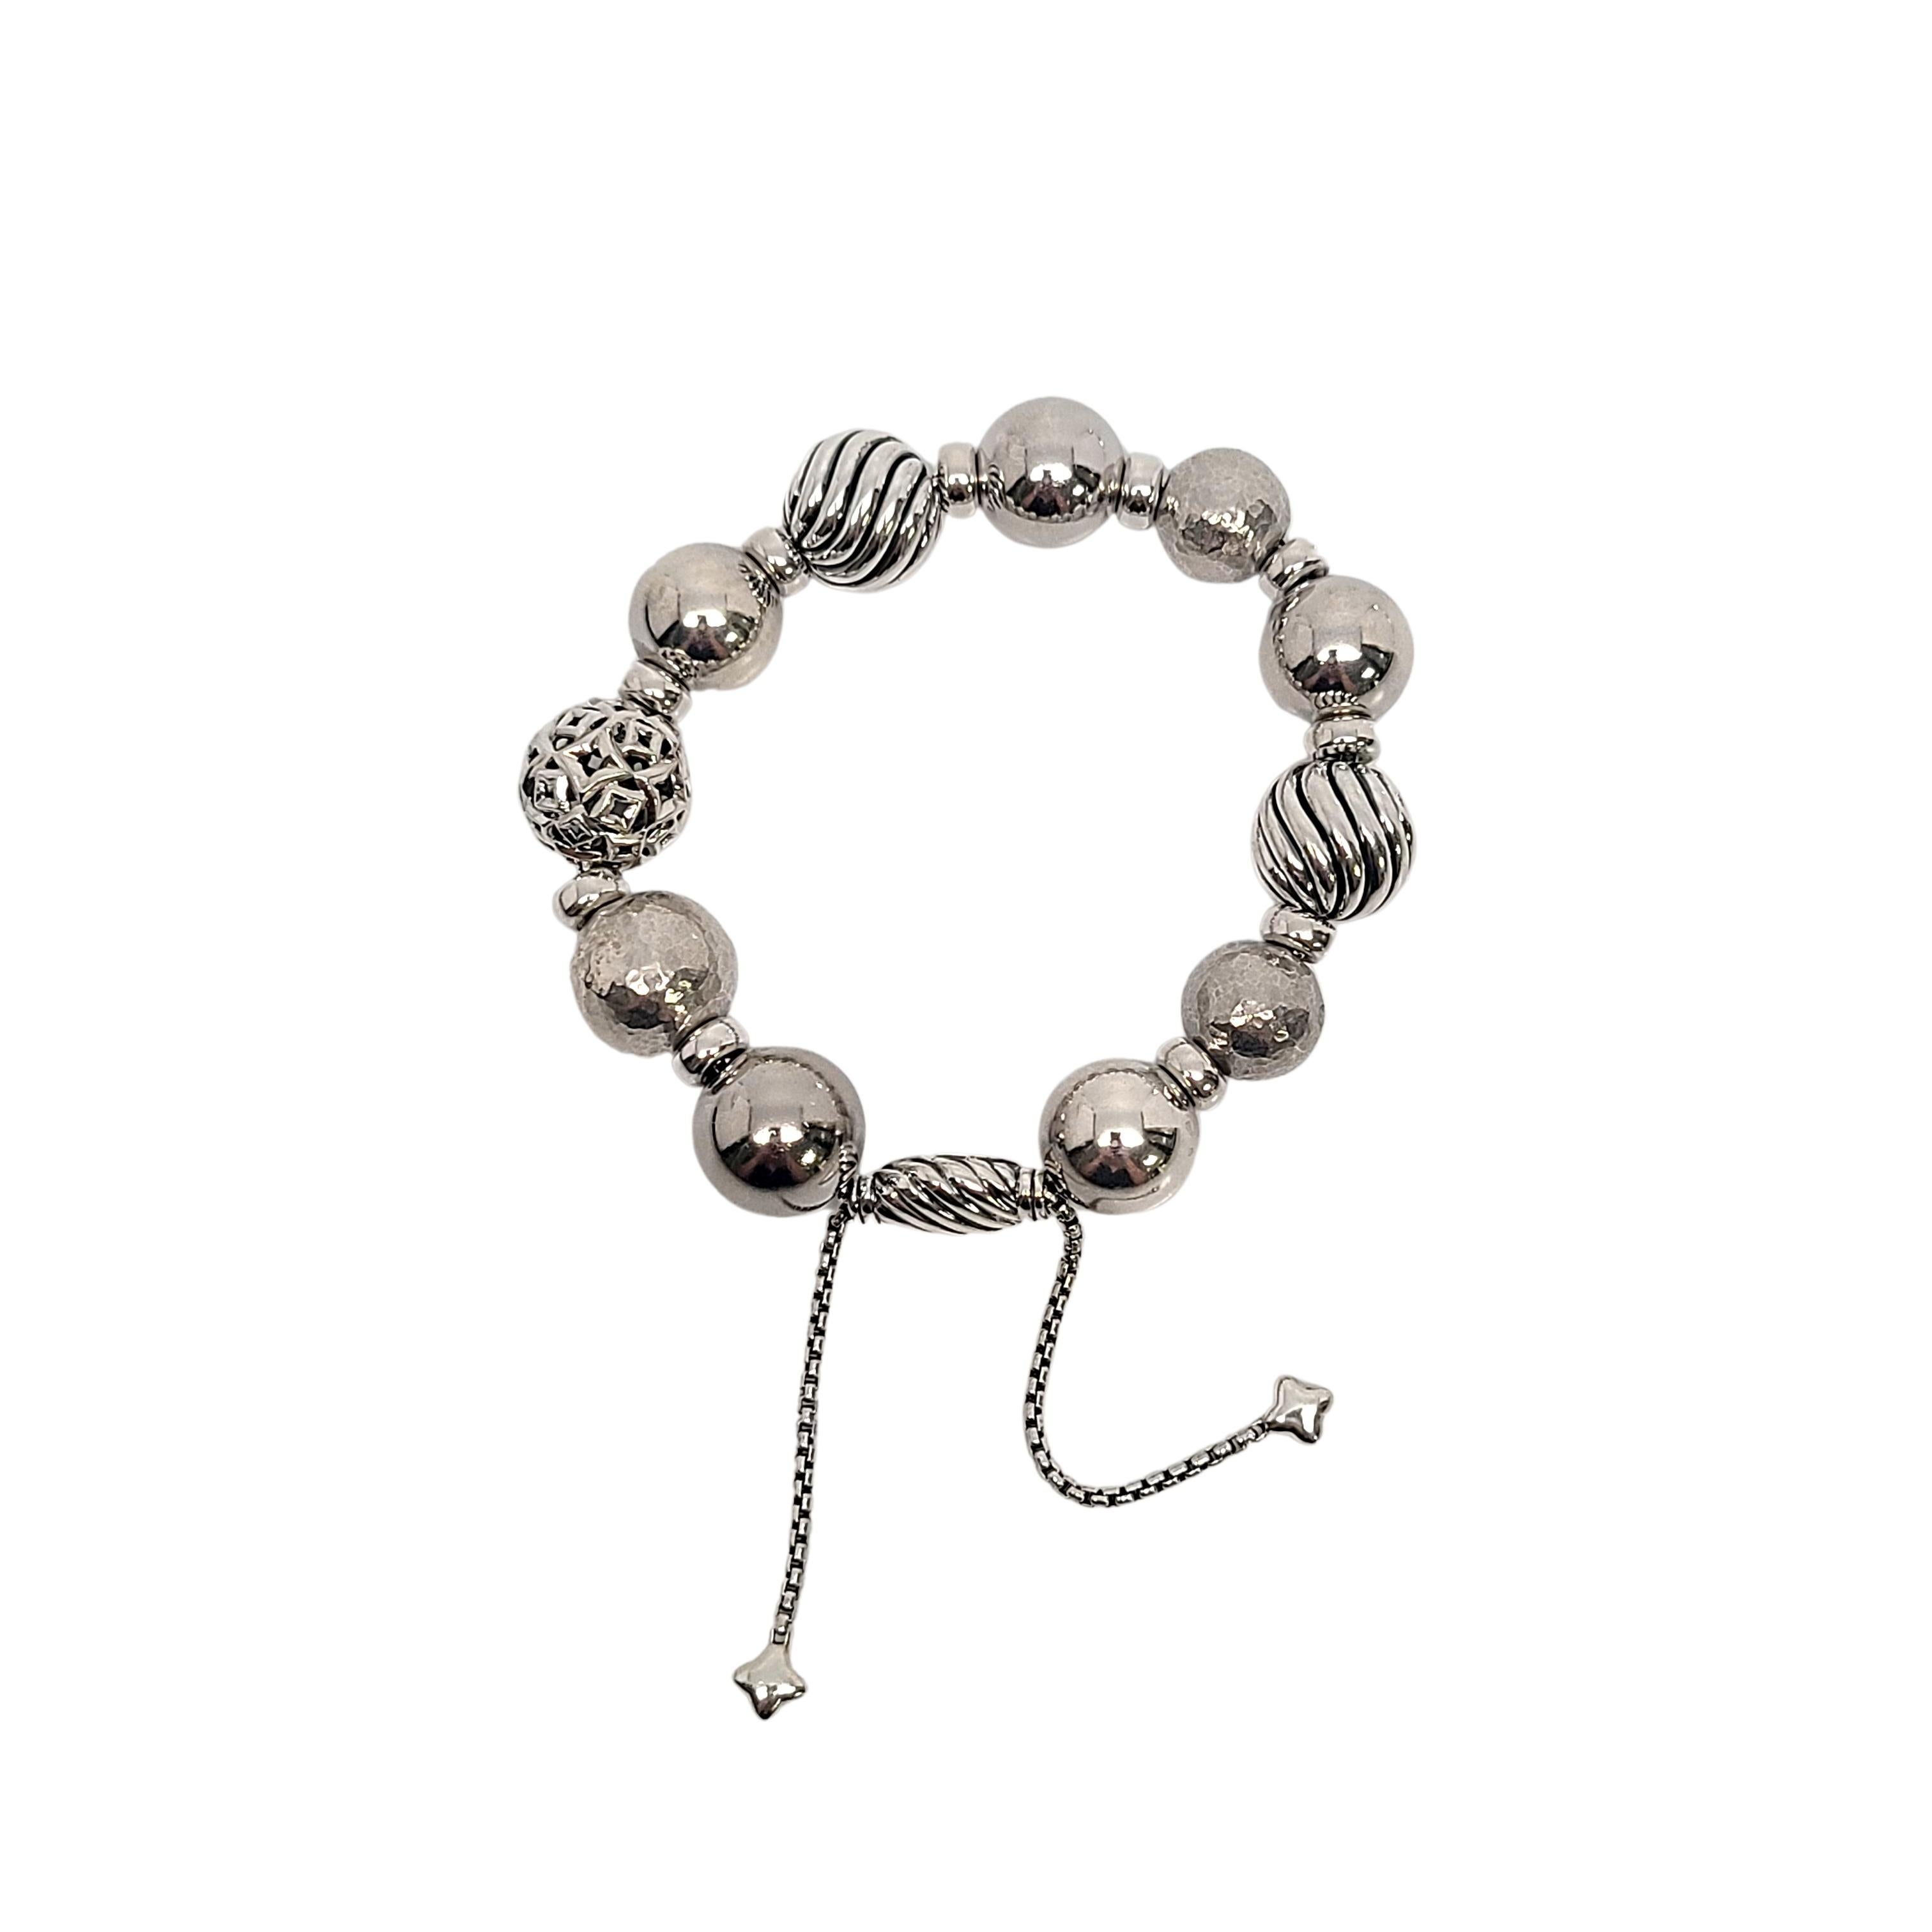 Sterling silver Elements bead bracelet by David Yurman

This beautiful sterling silver bracelet by David Yurman features large round silver beads, different textures of the beads include polished, hammered, ribbed and open work design. Bolo closure